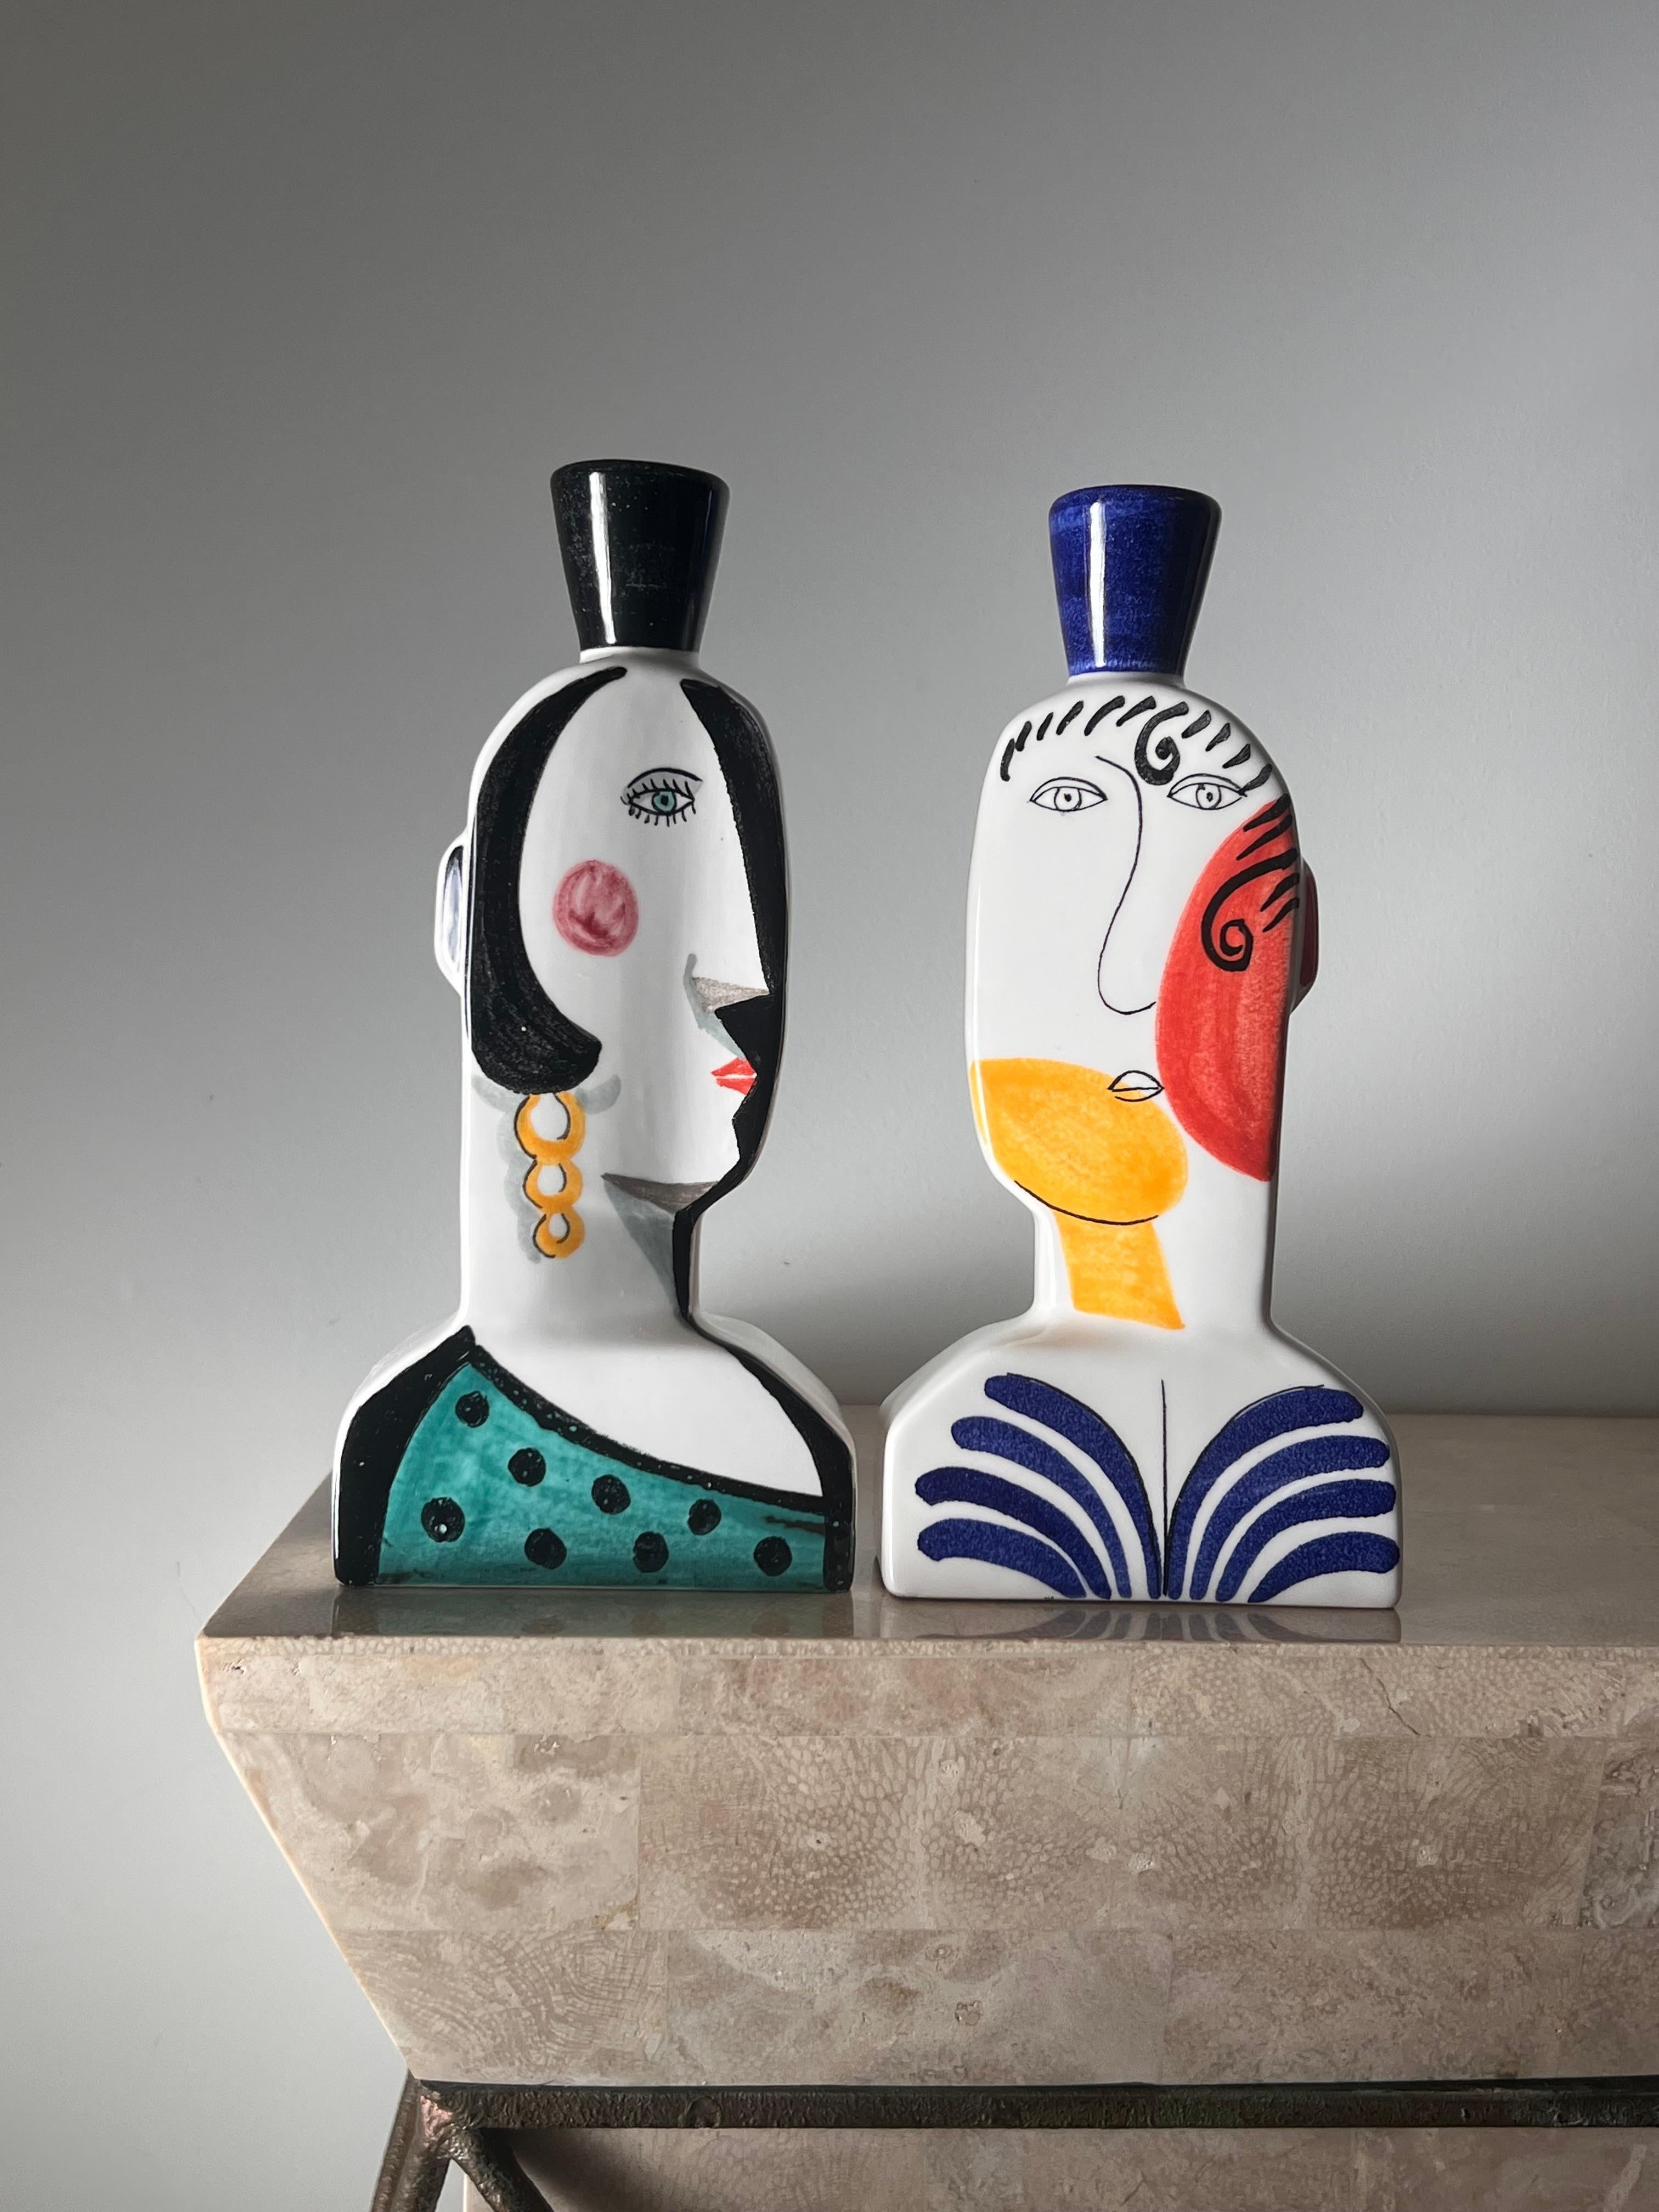 Ceramic Spanish Cubist figurative “Face” candlesticks, signed by artist, 20th century